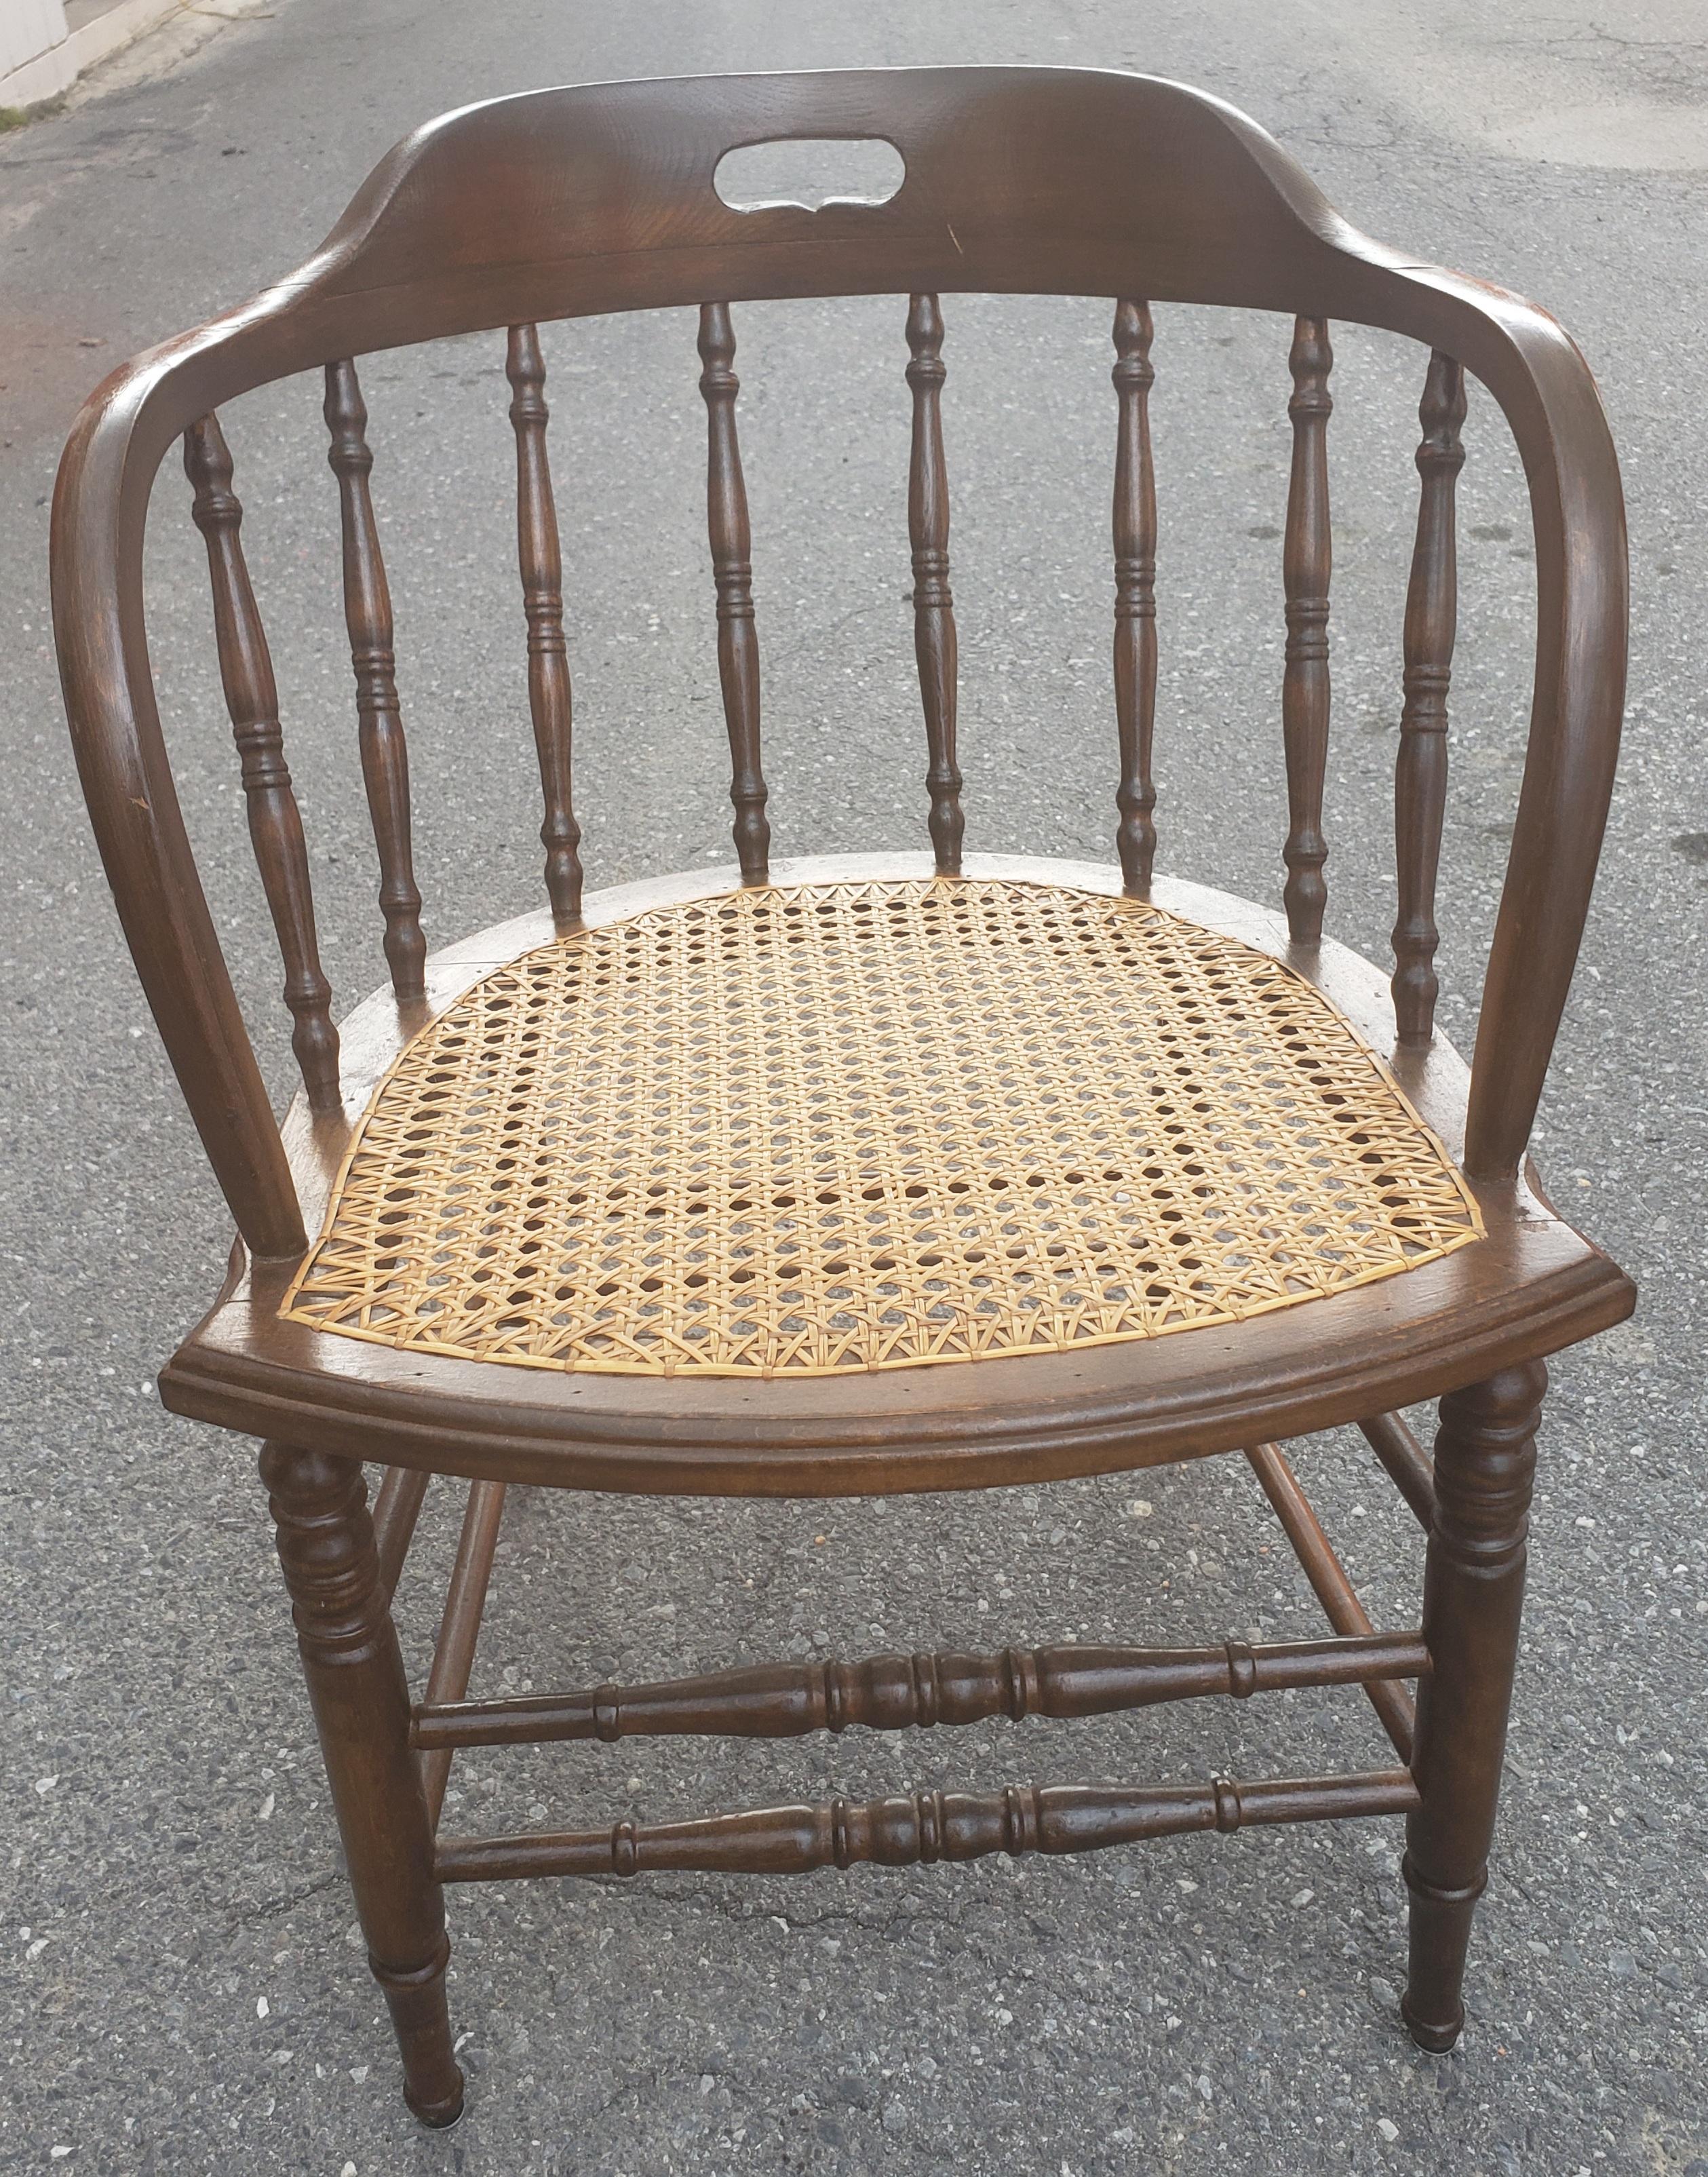 American Antique Barrel Back Firehouse Windsor Chair with Cane Seat